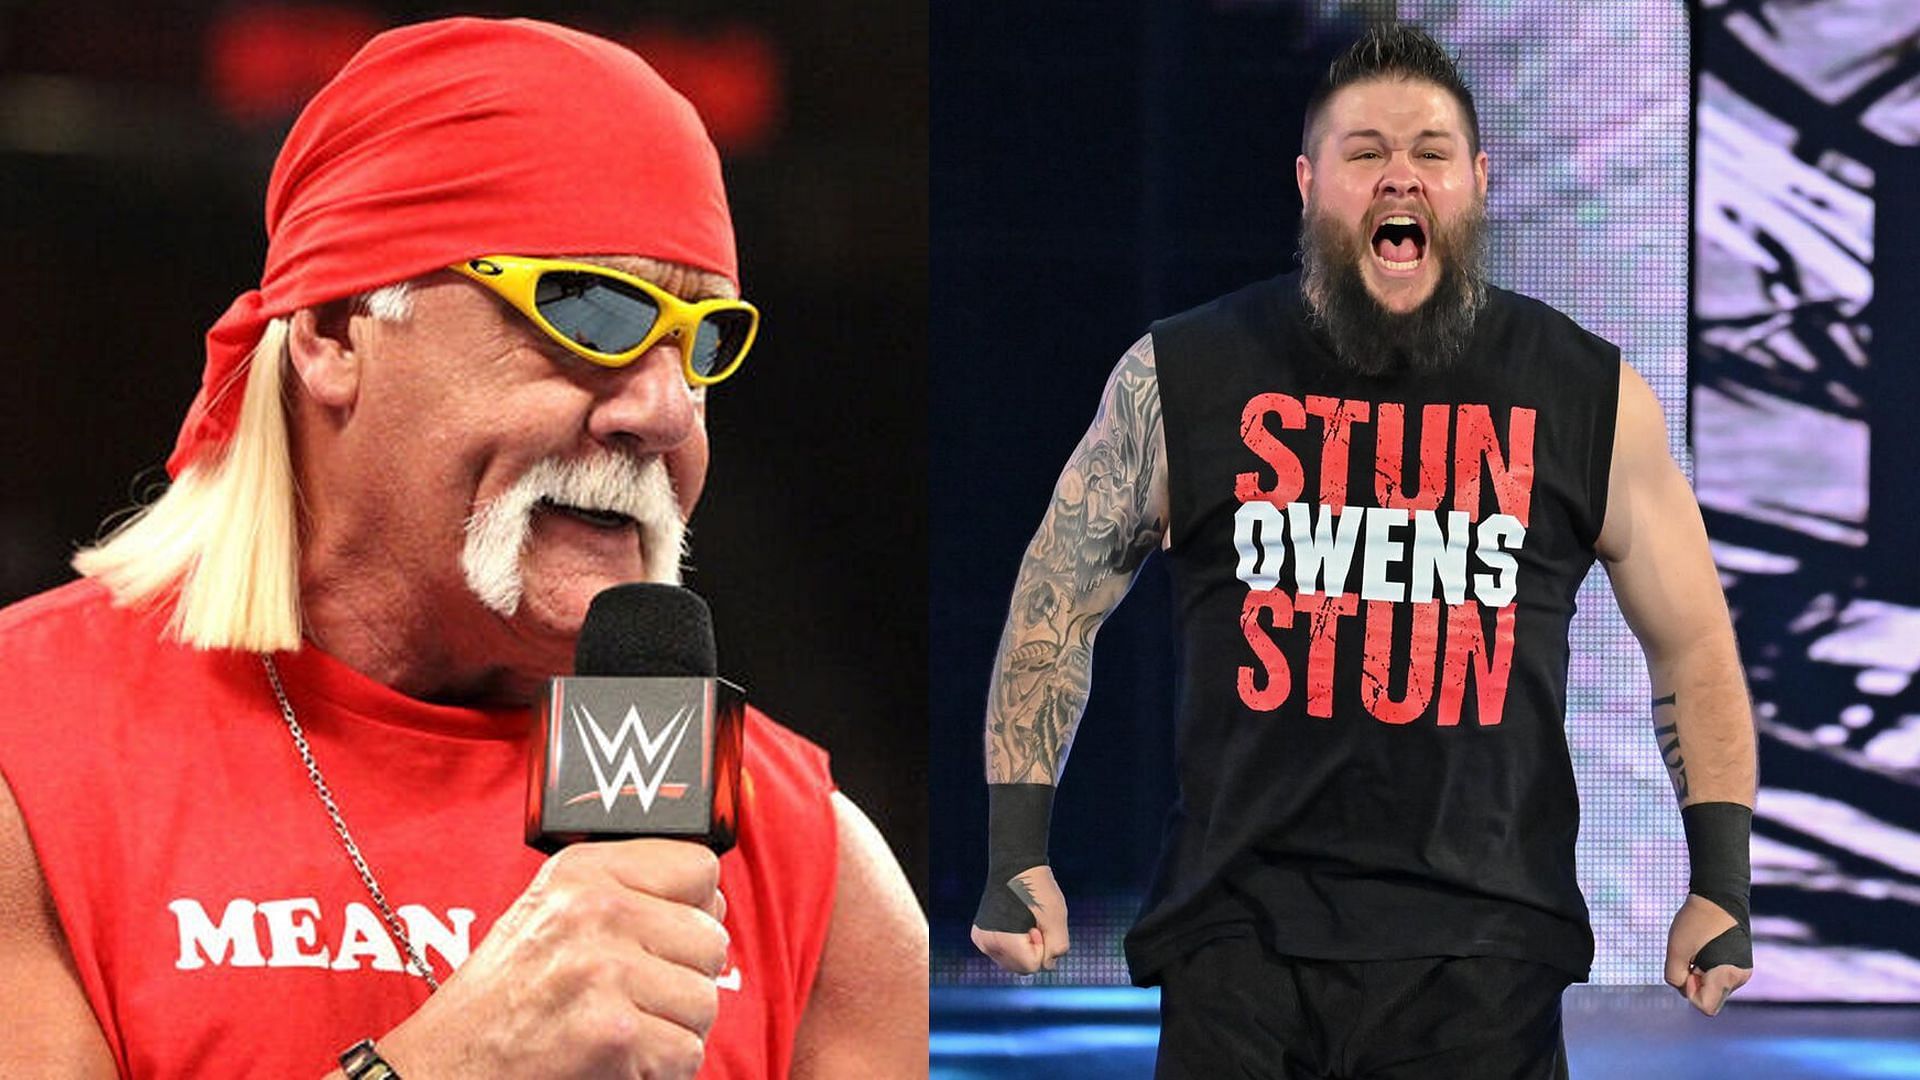 Hulk Hogan claims he was the first to identify Kevin Owens